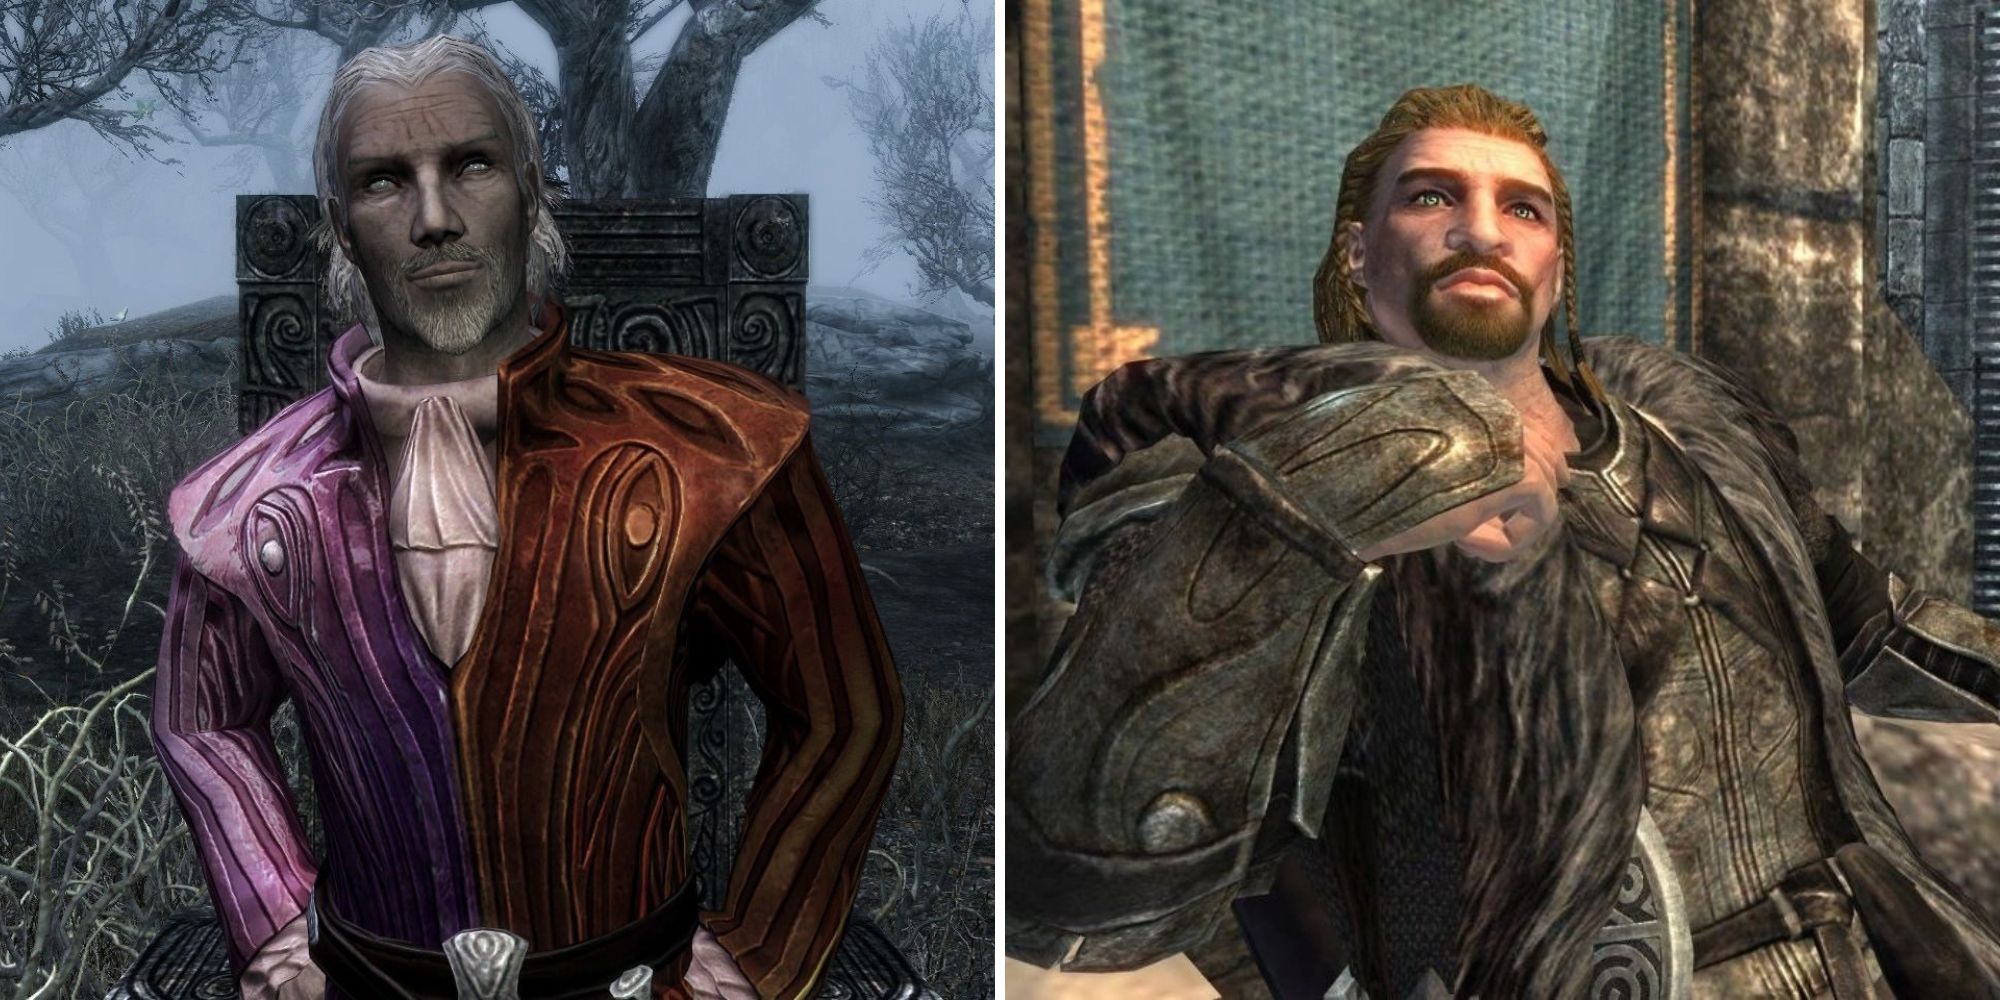 On the left is Sheogorath in his purple and red suit and on the right is Ulfric Stormcloak sitting at his throne in Skyrim